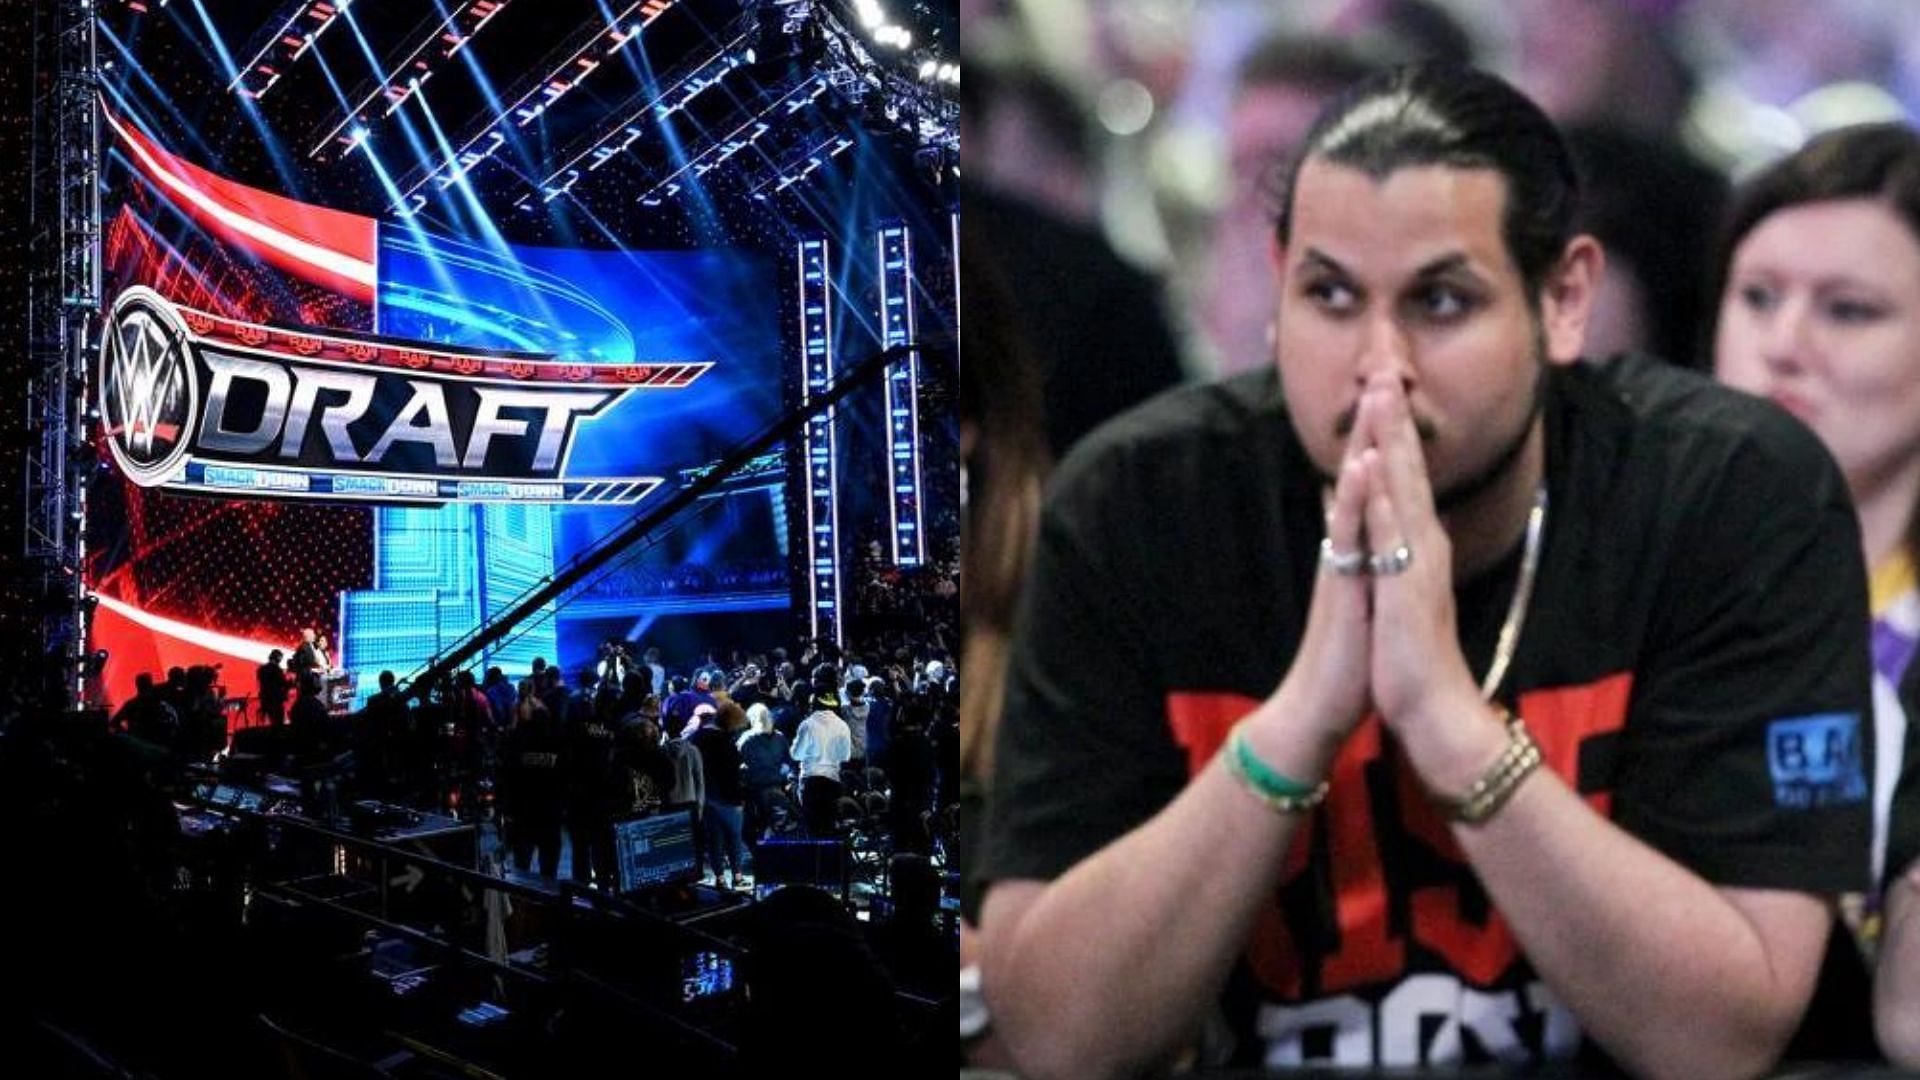 The WWE Draft happened earlier this year. 